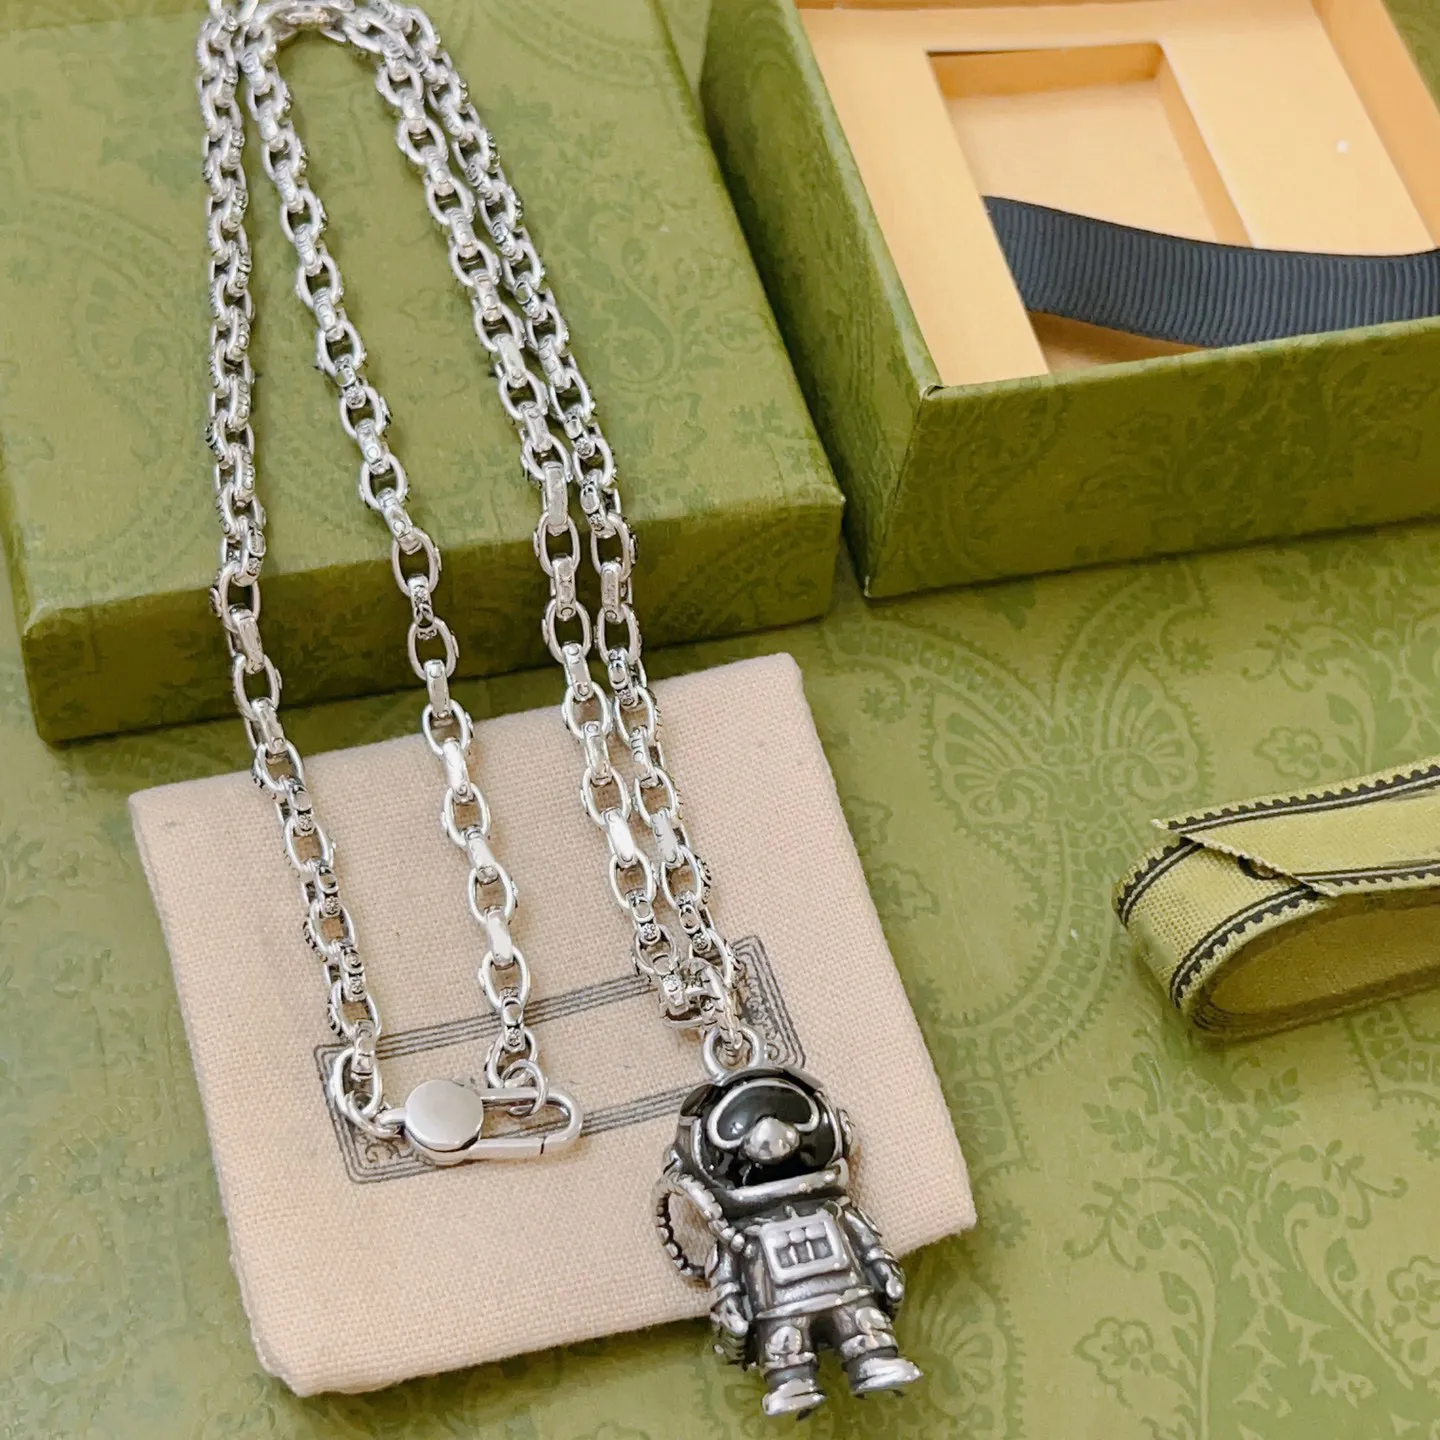 Luxury Design Necklace Stainless Steel Necklaces Choker Chain Letter Robot Pendant Fashion Ancient Forest Jewelry No Box S2911